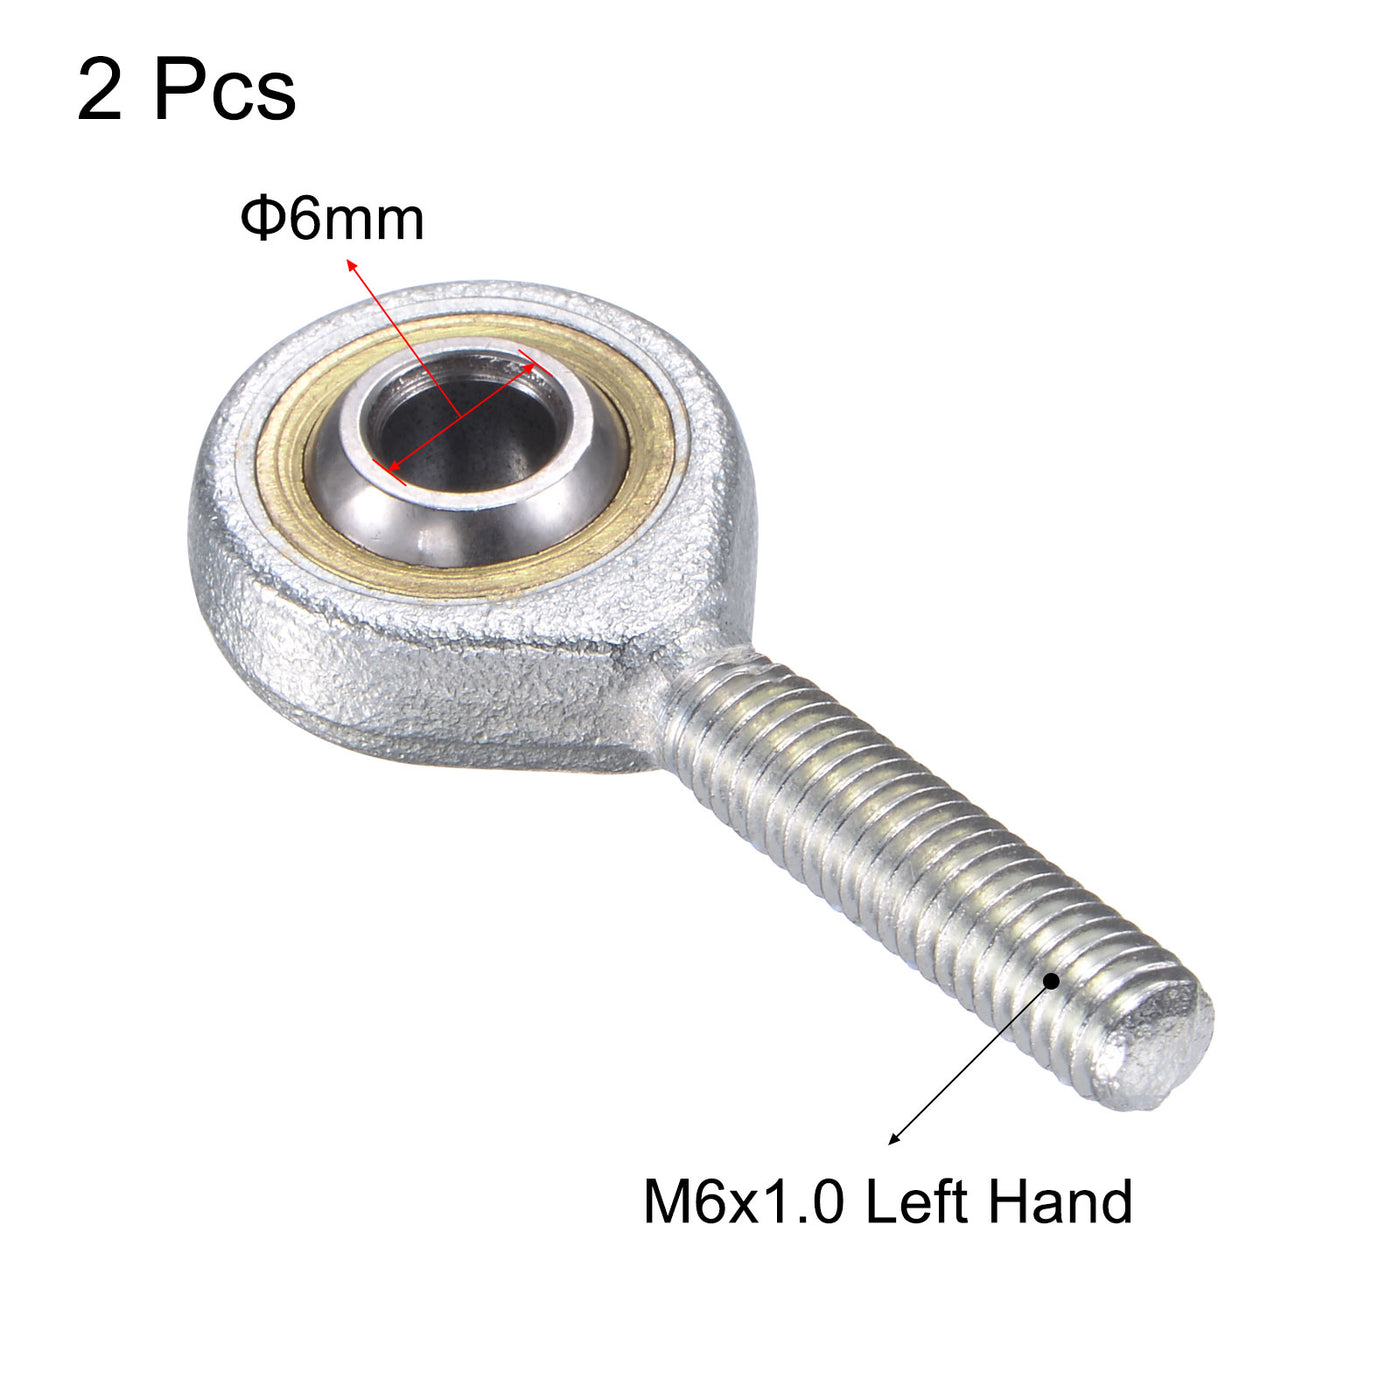 uxcell Uxcell 2pcs SA6TK POSA6 Rod End Bearing 6mm Bore M6x1.0 Left Hand Male Thread